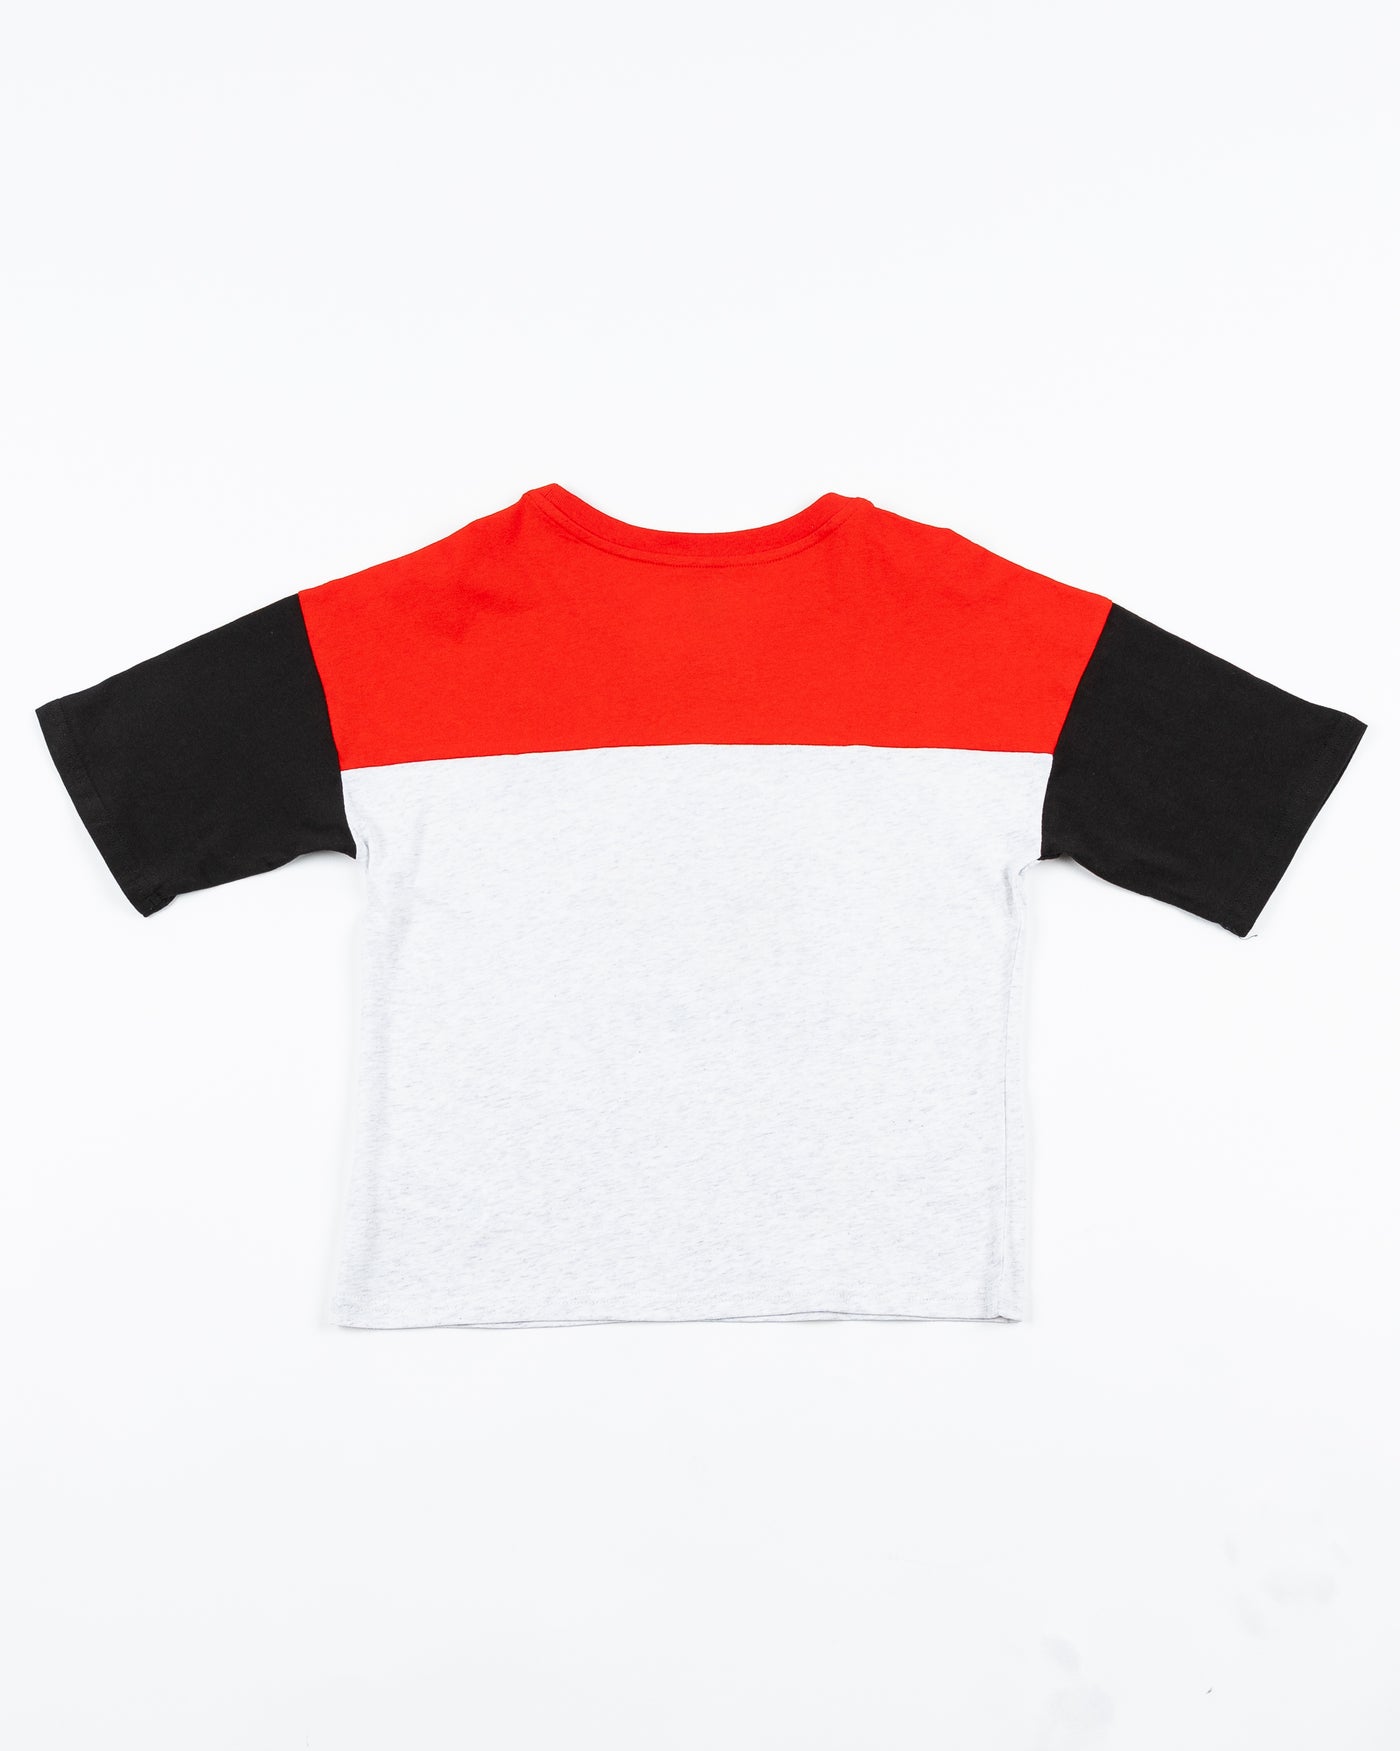 grey black and red color blocked youth tee with Chicago Blackhawks wordmark and primary logo across chest - back lay flat